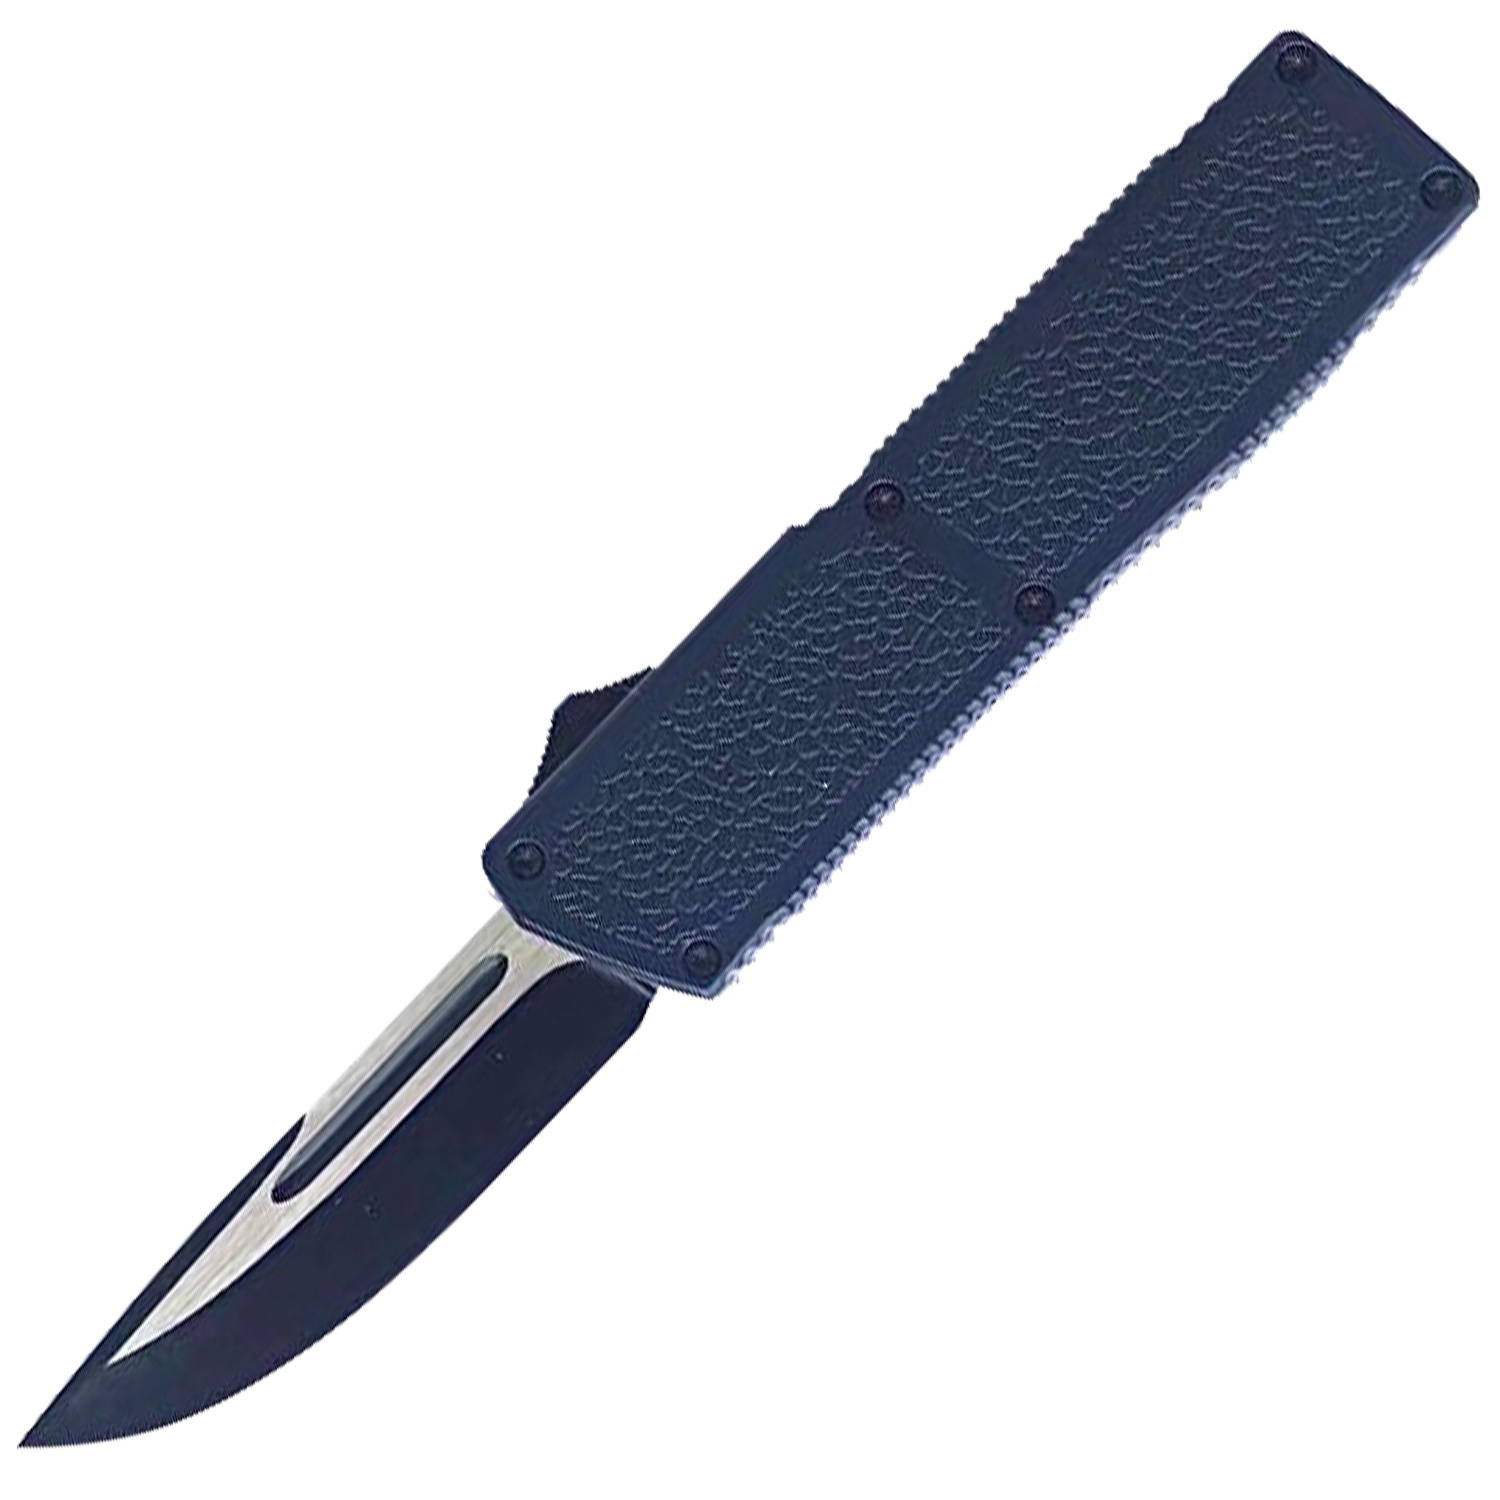 Lighting Action Assisted Knife Black Killa Drop Point